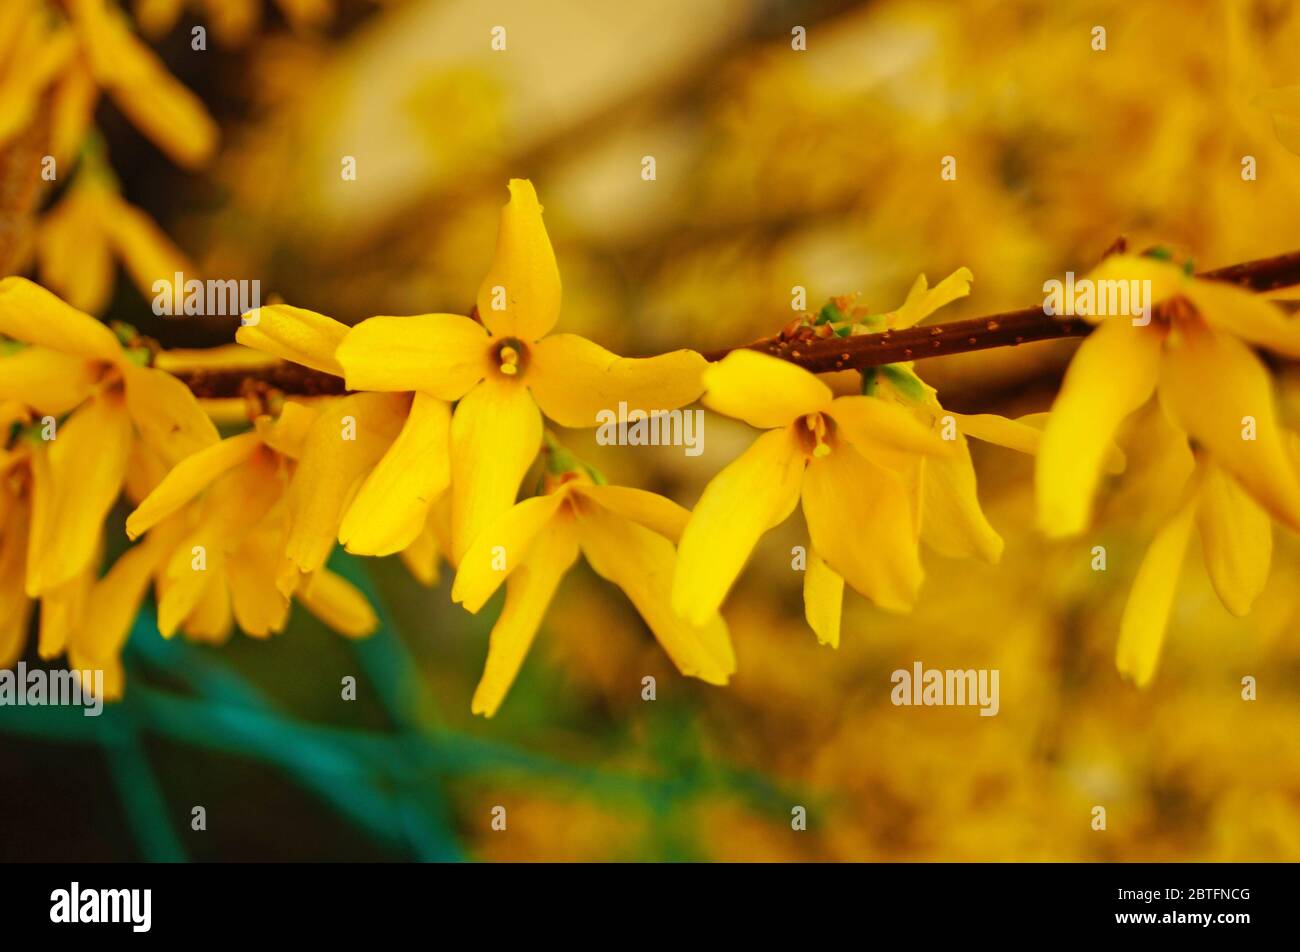 Forsythia branch with flowers with delicate yellow petals on a spring day Stock Photo